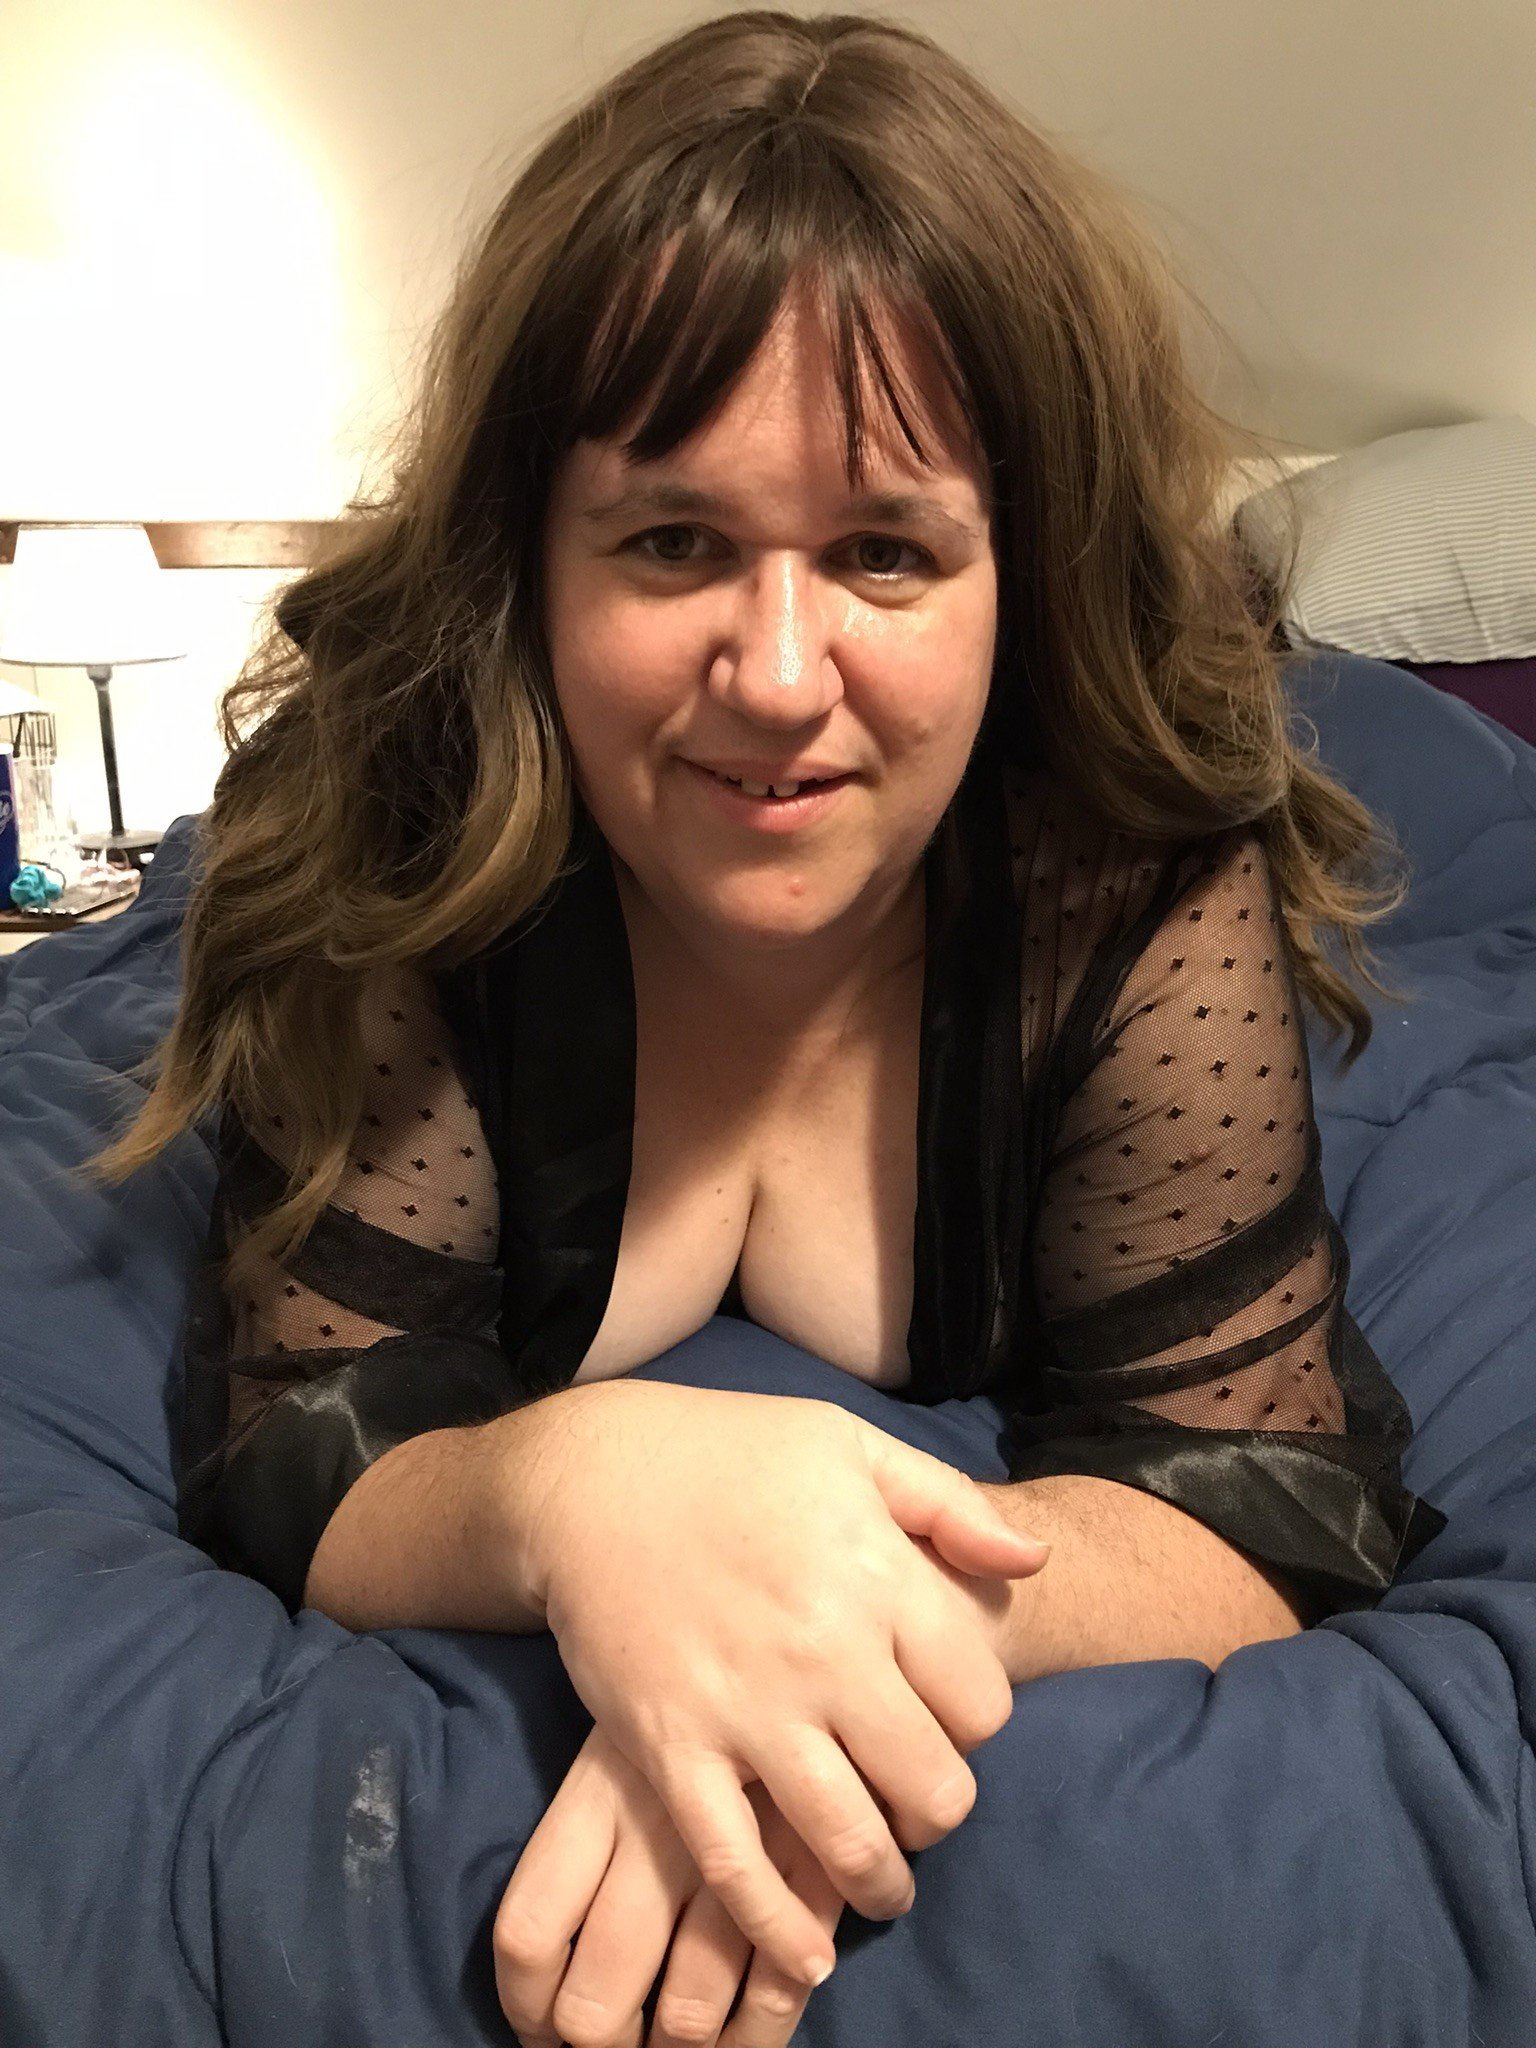 Photo by Naomipeaks with the username @Naomipeaks,  April 26, 2022 at 3:21 AM. The post is about the topic BBW and Chubby and the text says 'Just some photos i took the other night. enjoy!'